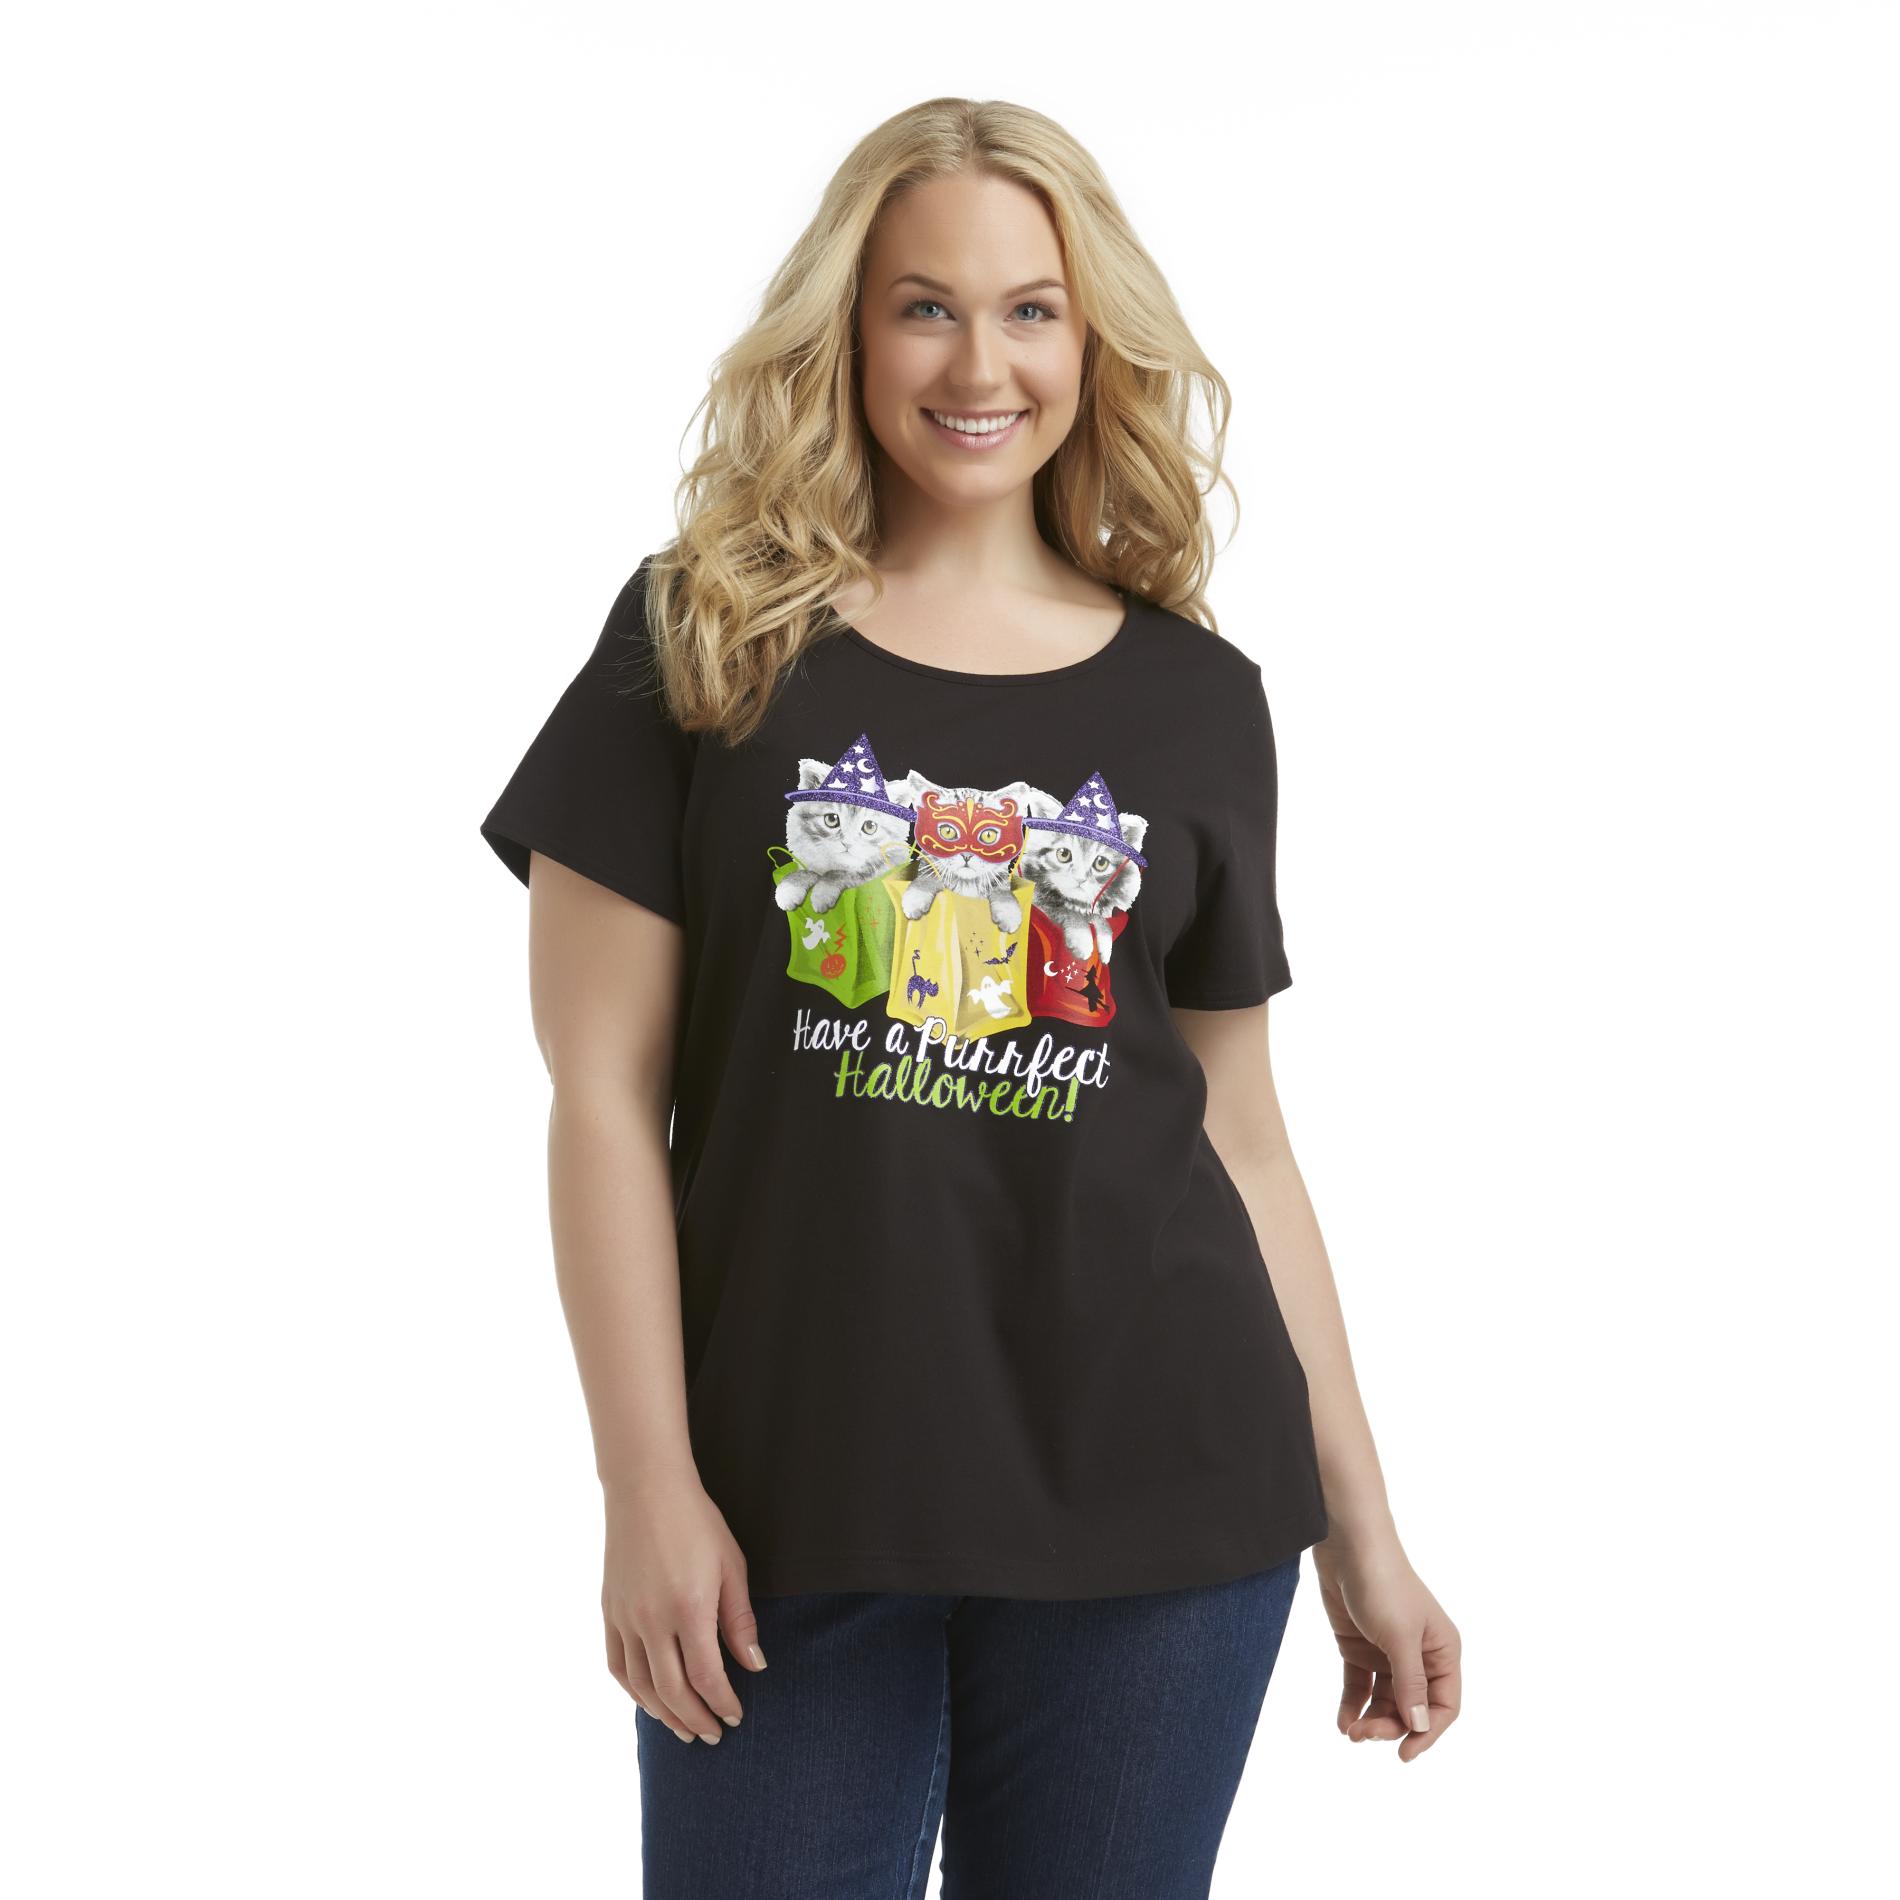 Holiday Editions Women's Plus T-Shirt - Purrfect Halloween